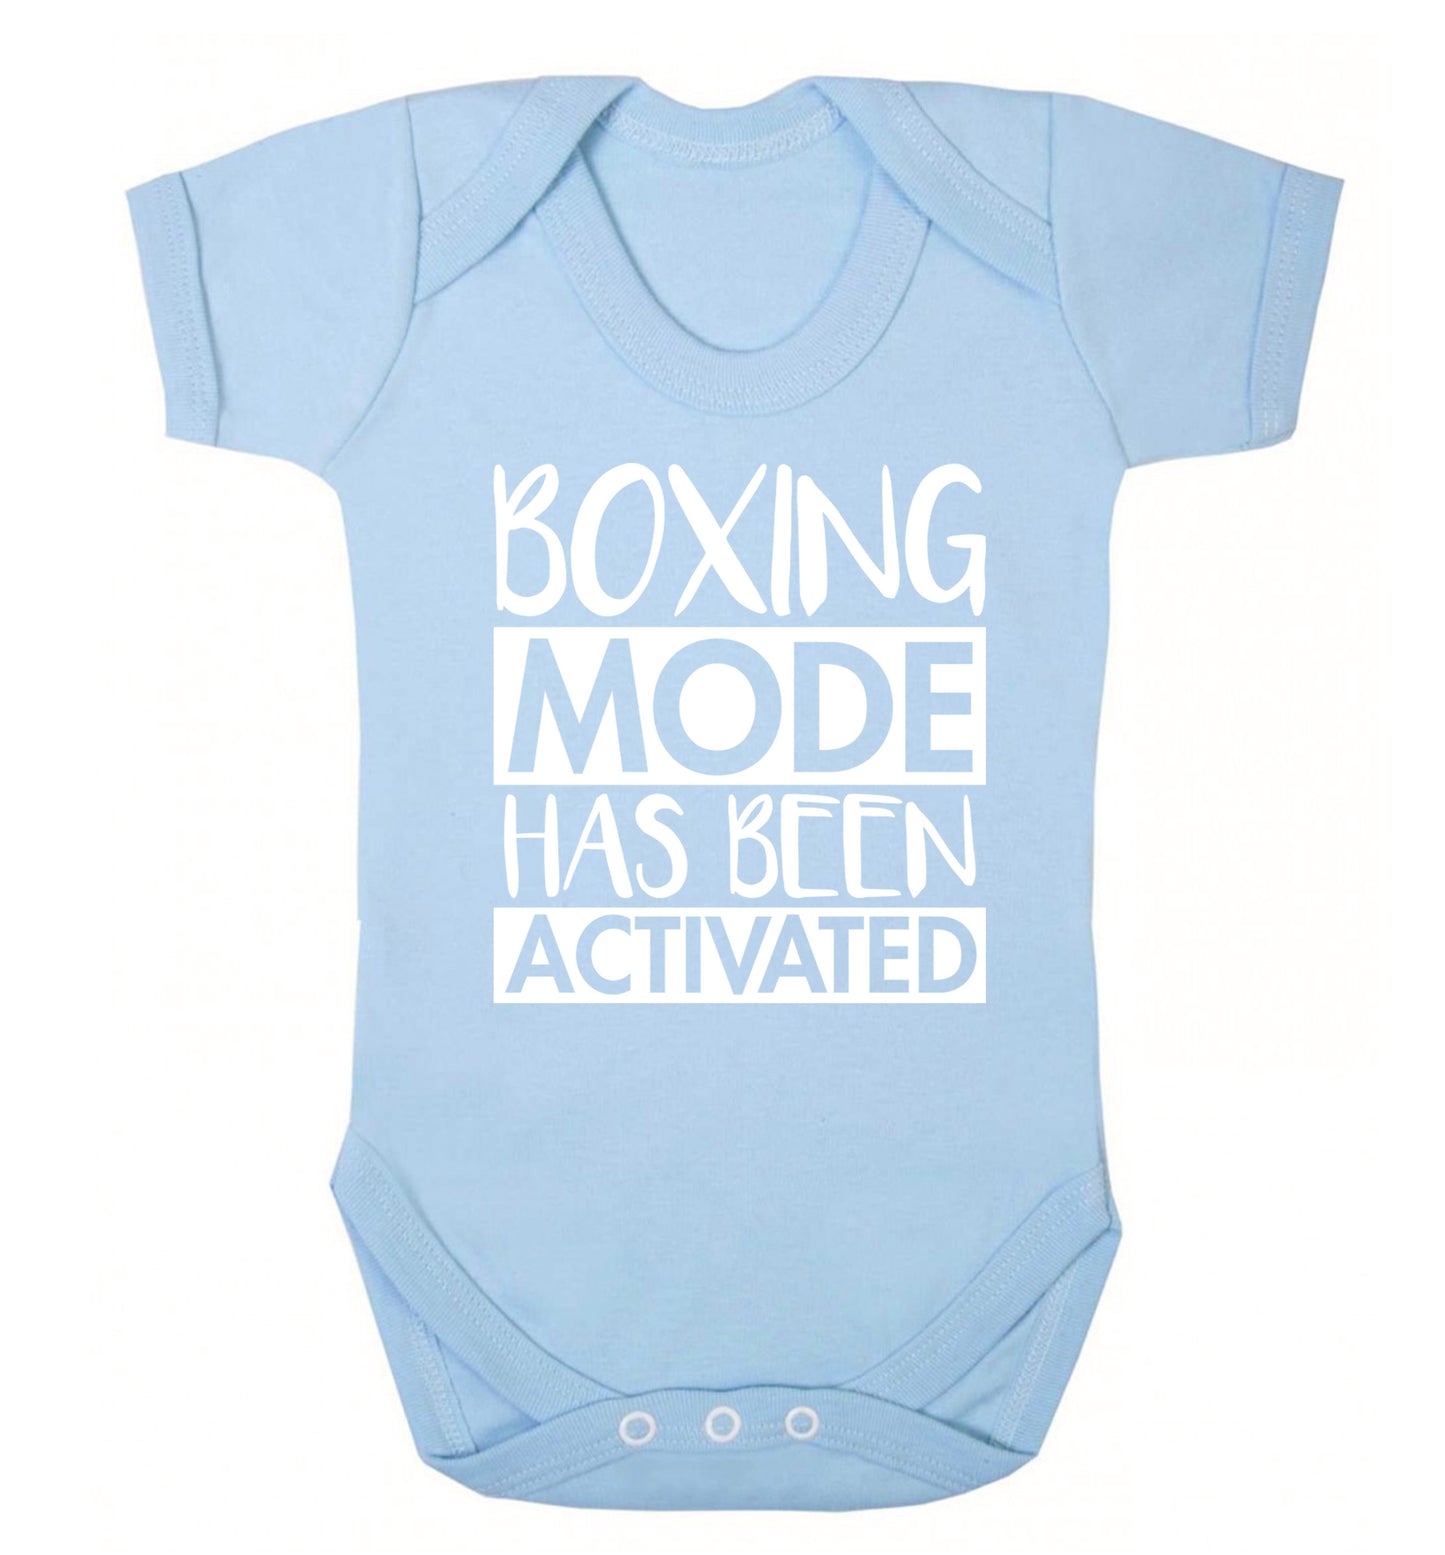 Boxing mode activated Baby Vest pale blue 18-24 months